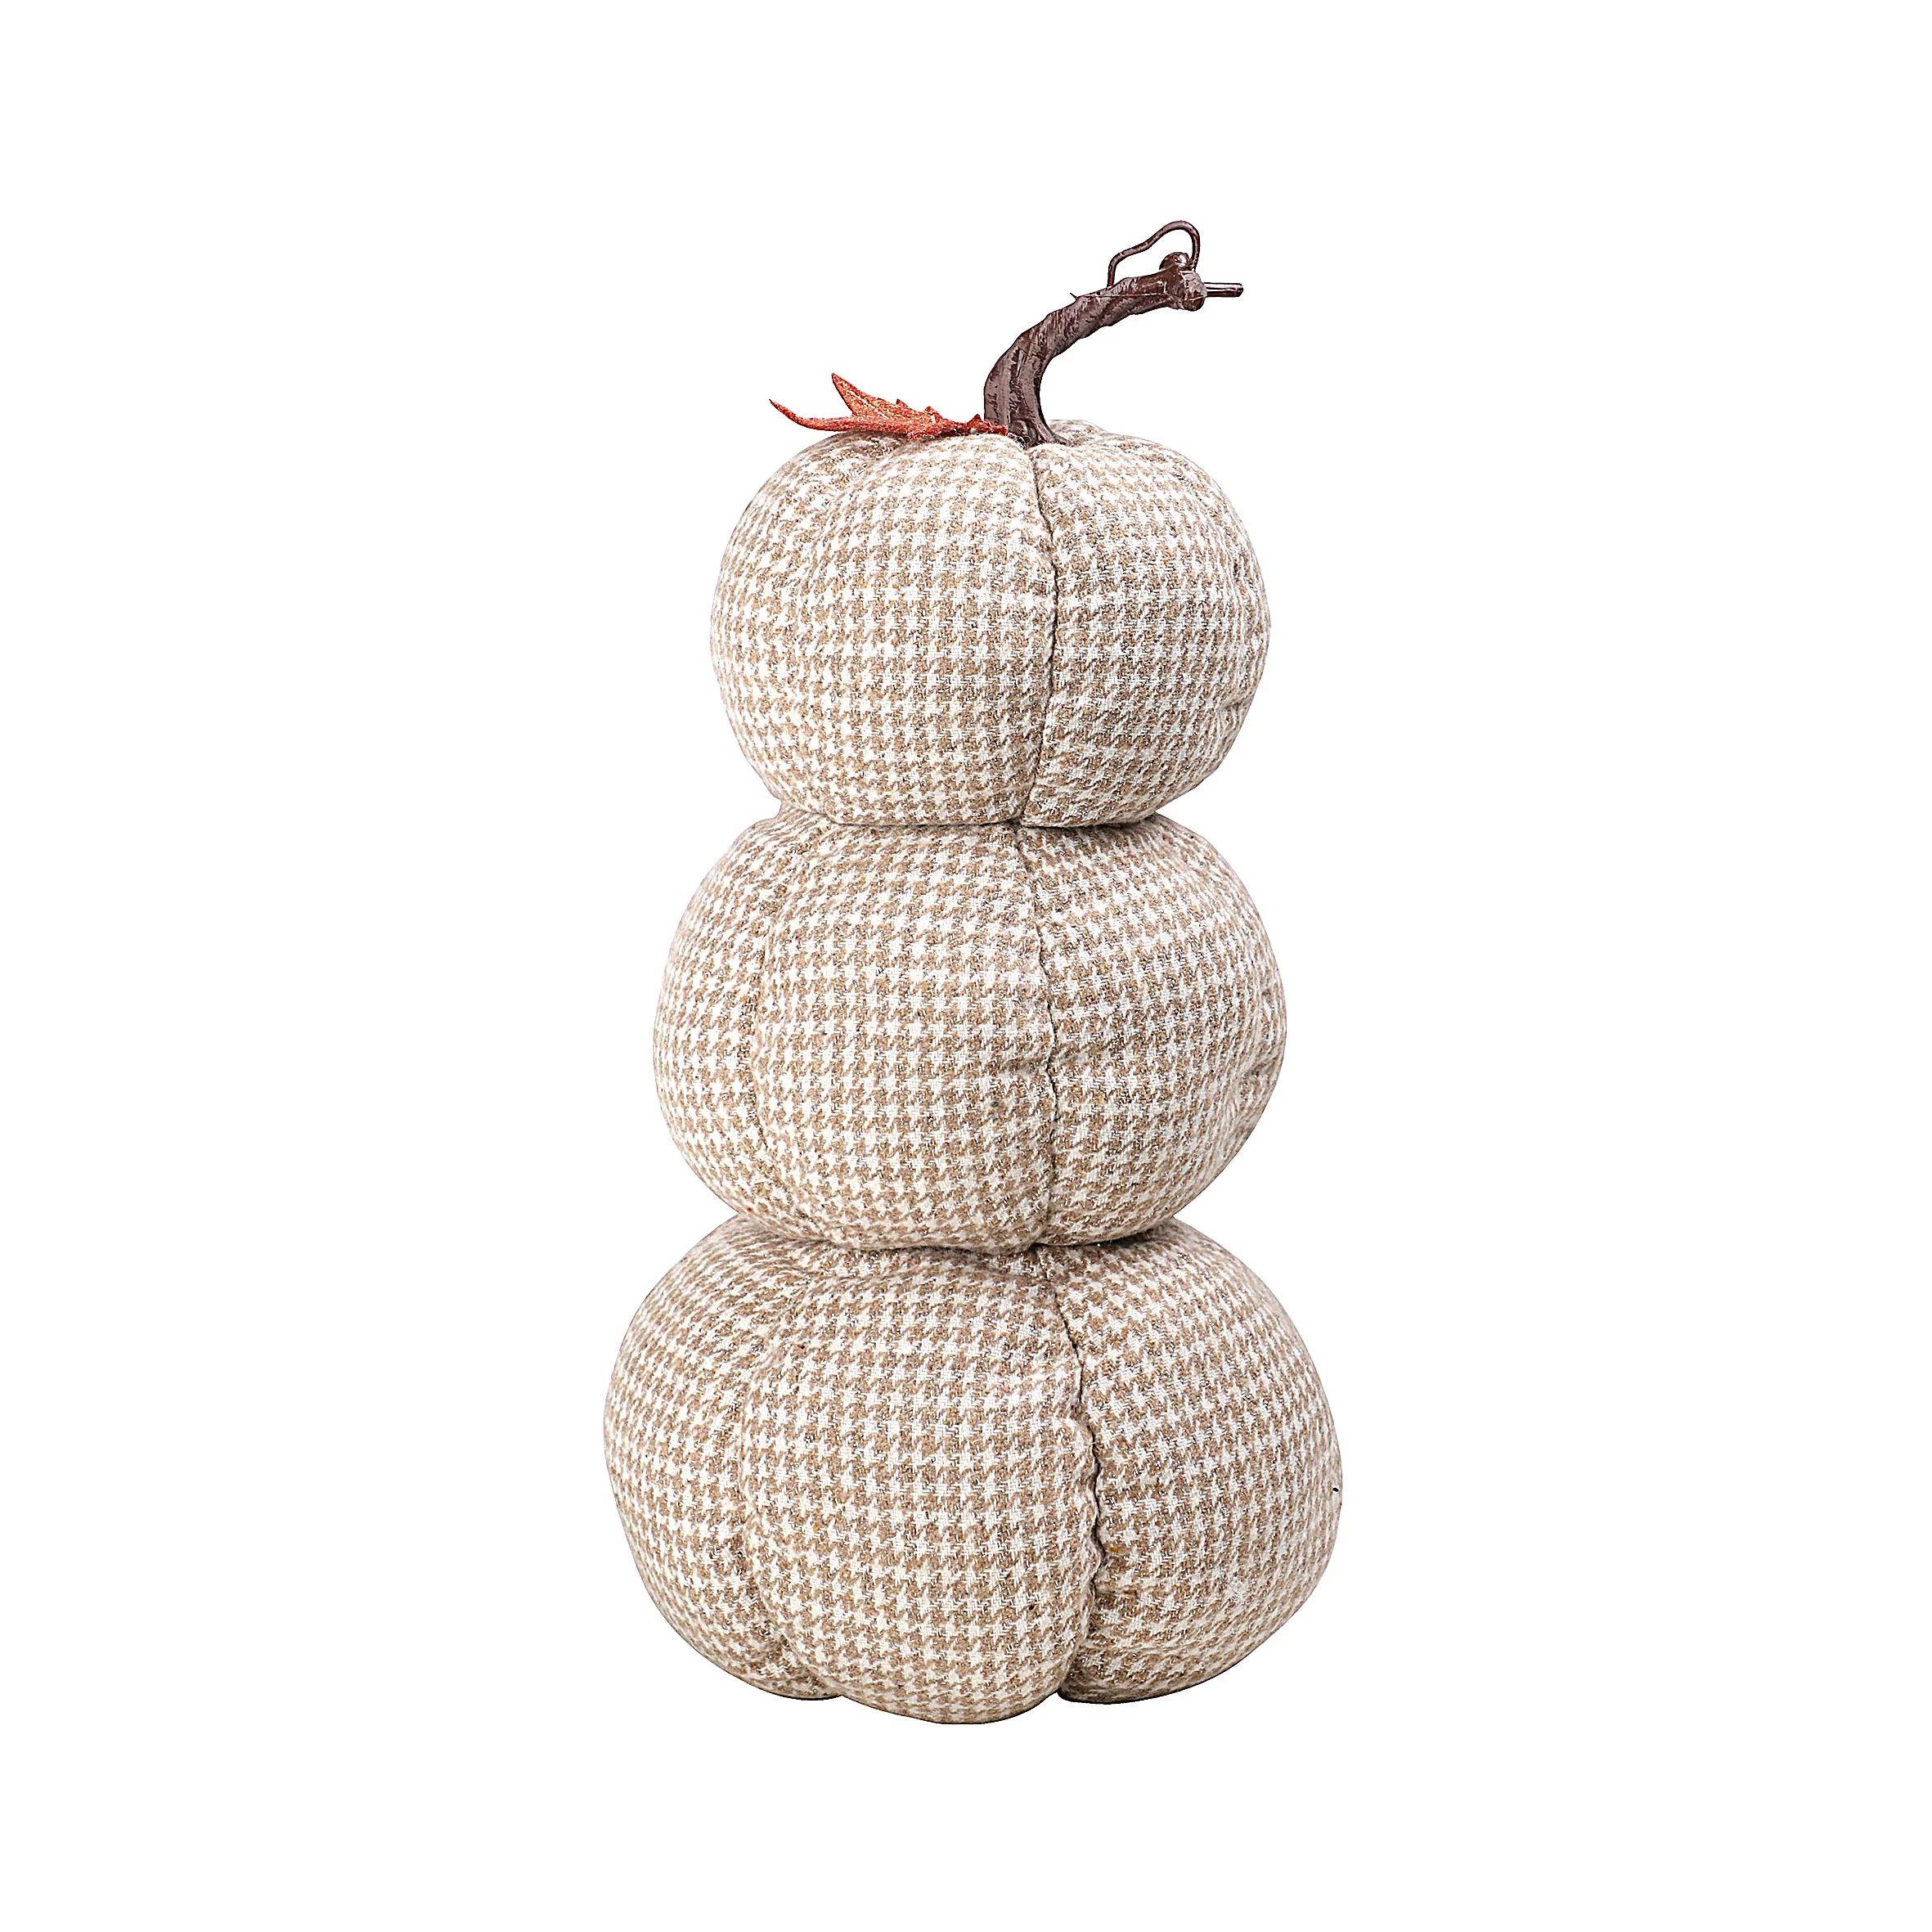 Way to Celebrate Harvest Stacked Plaid Fabric Pumpkins Décor (Set of 2) | Walmart (US)